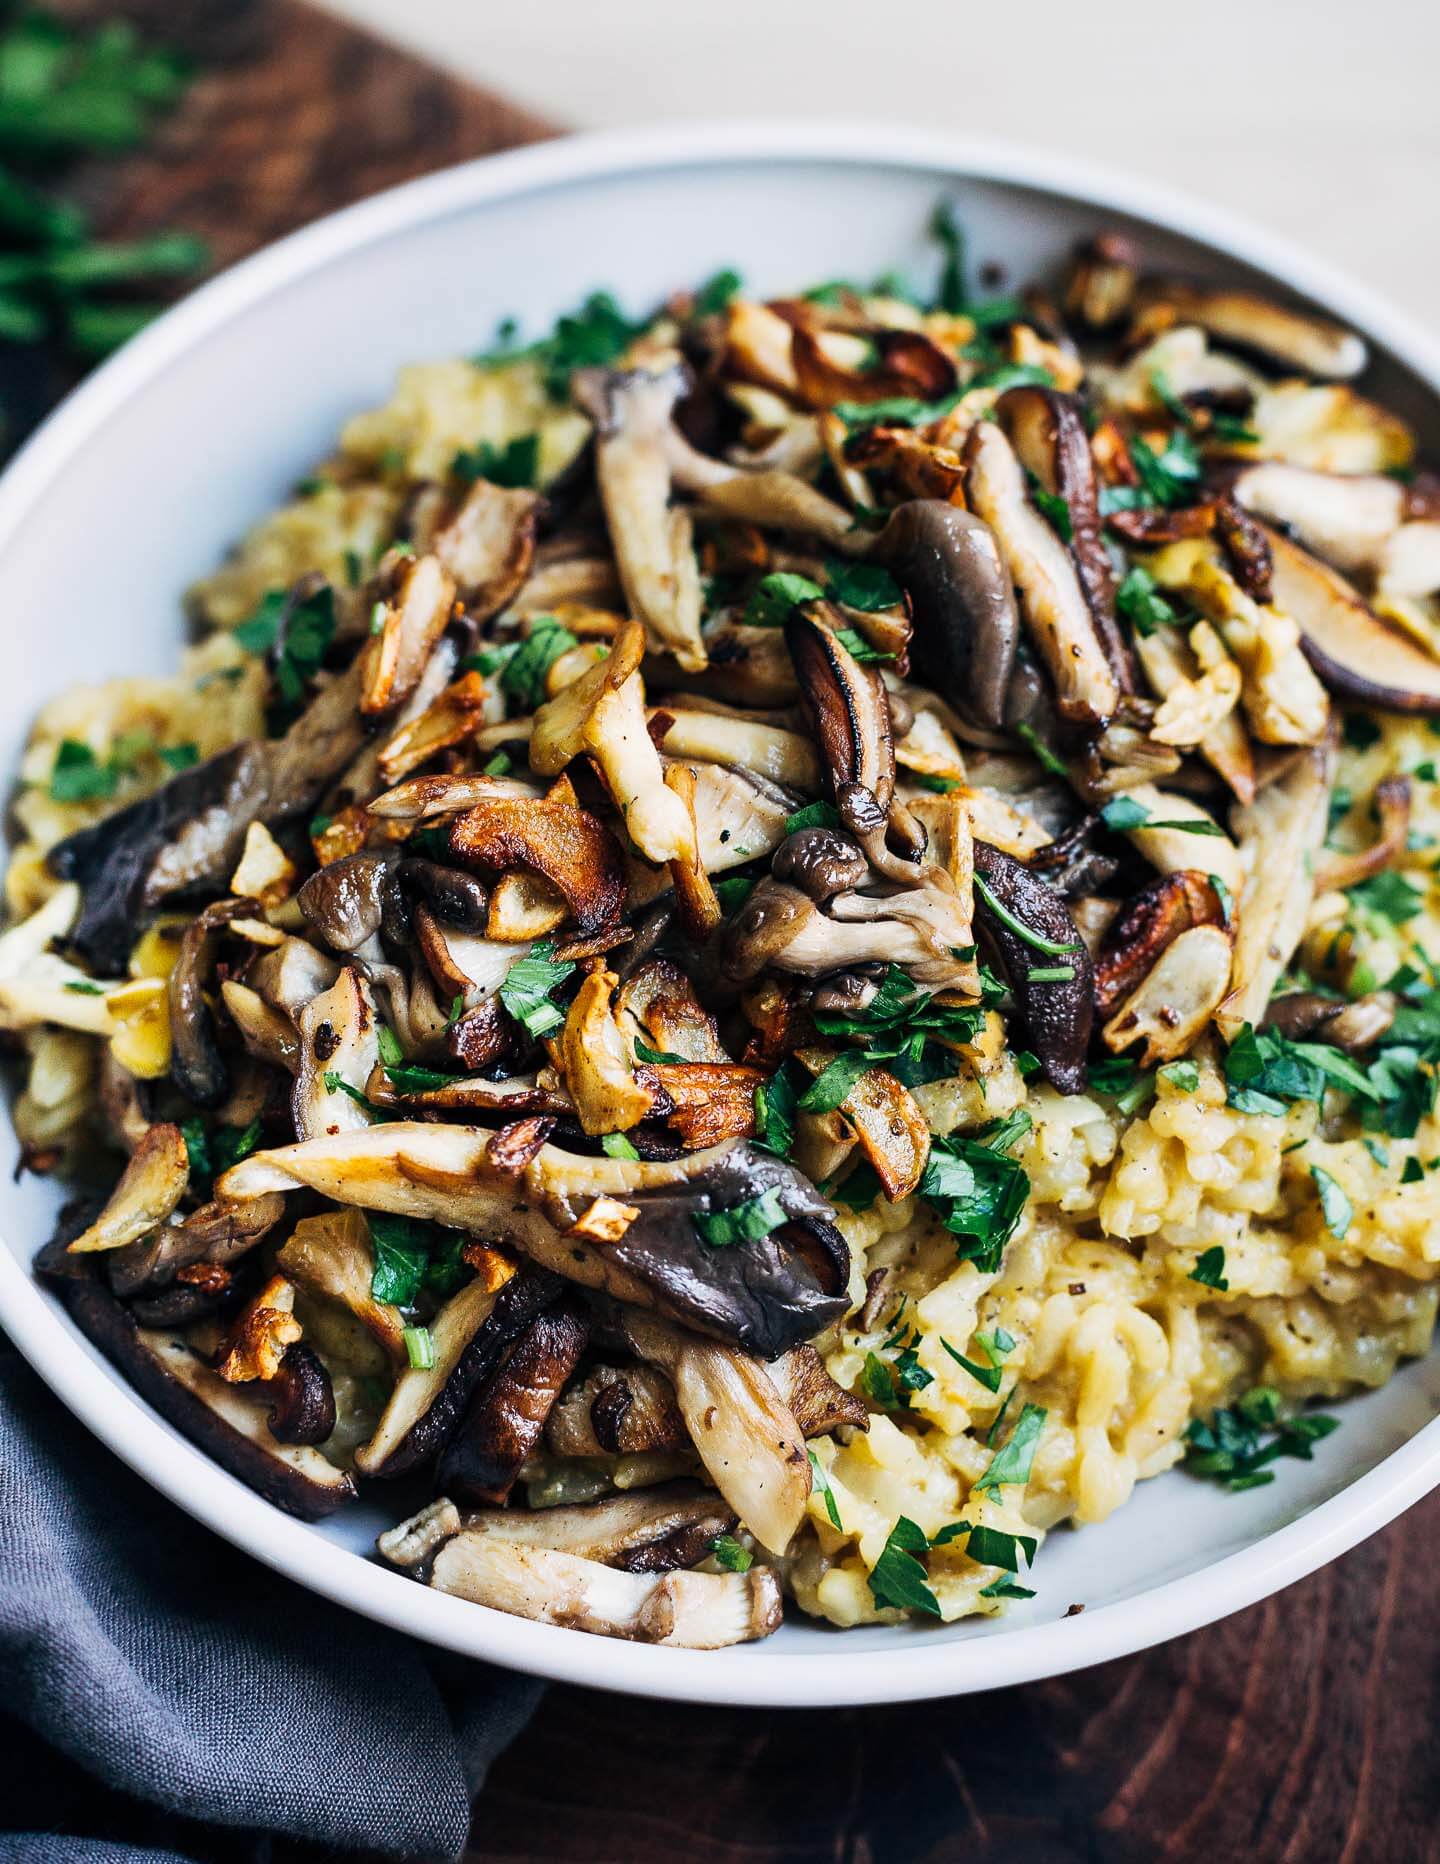 This creamy, umami-rich vegan risotto is made in an Instant Pot and topped with crispy-edged mushrooms and nutty toasted garlic.